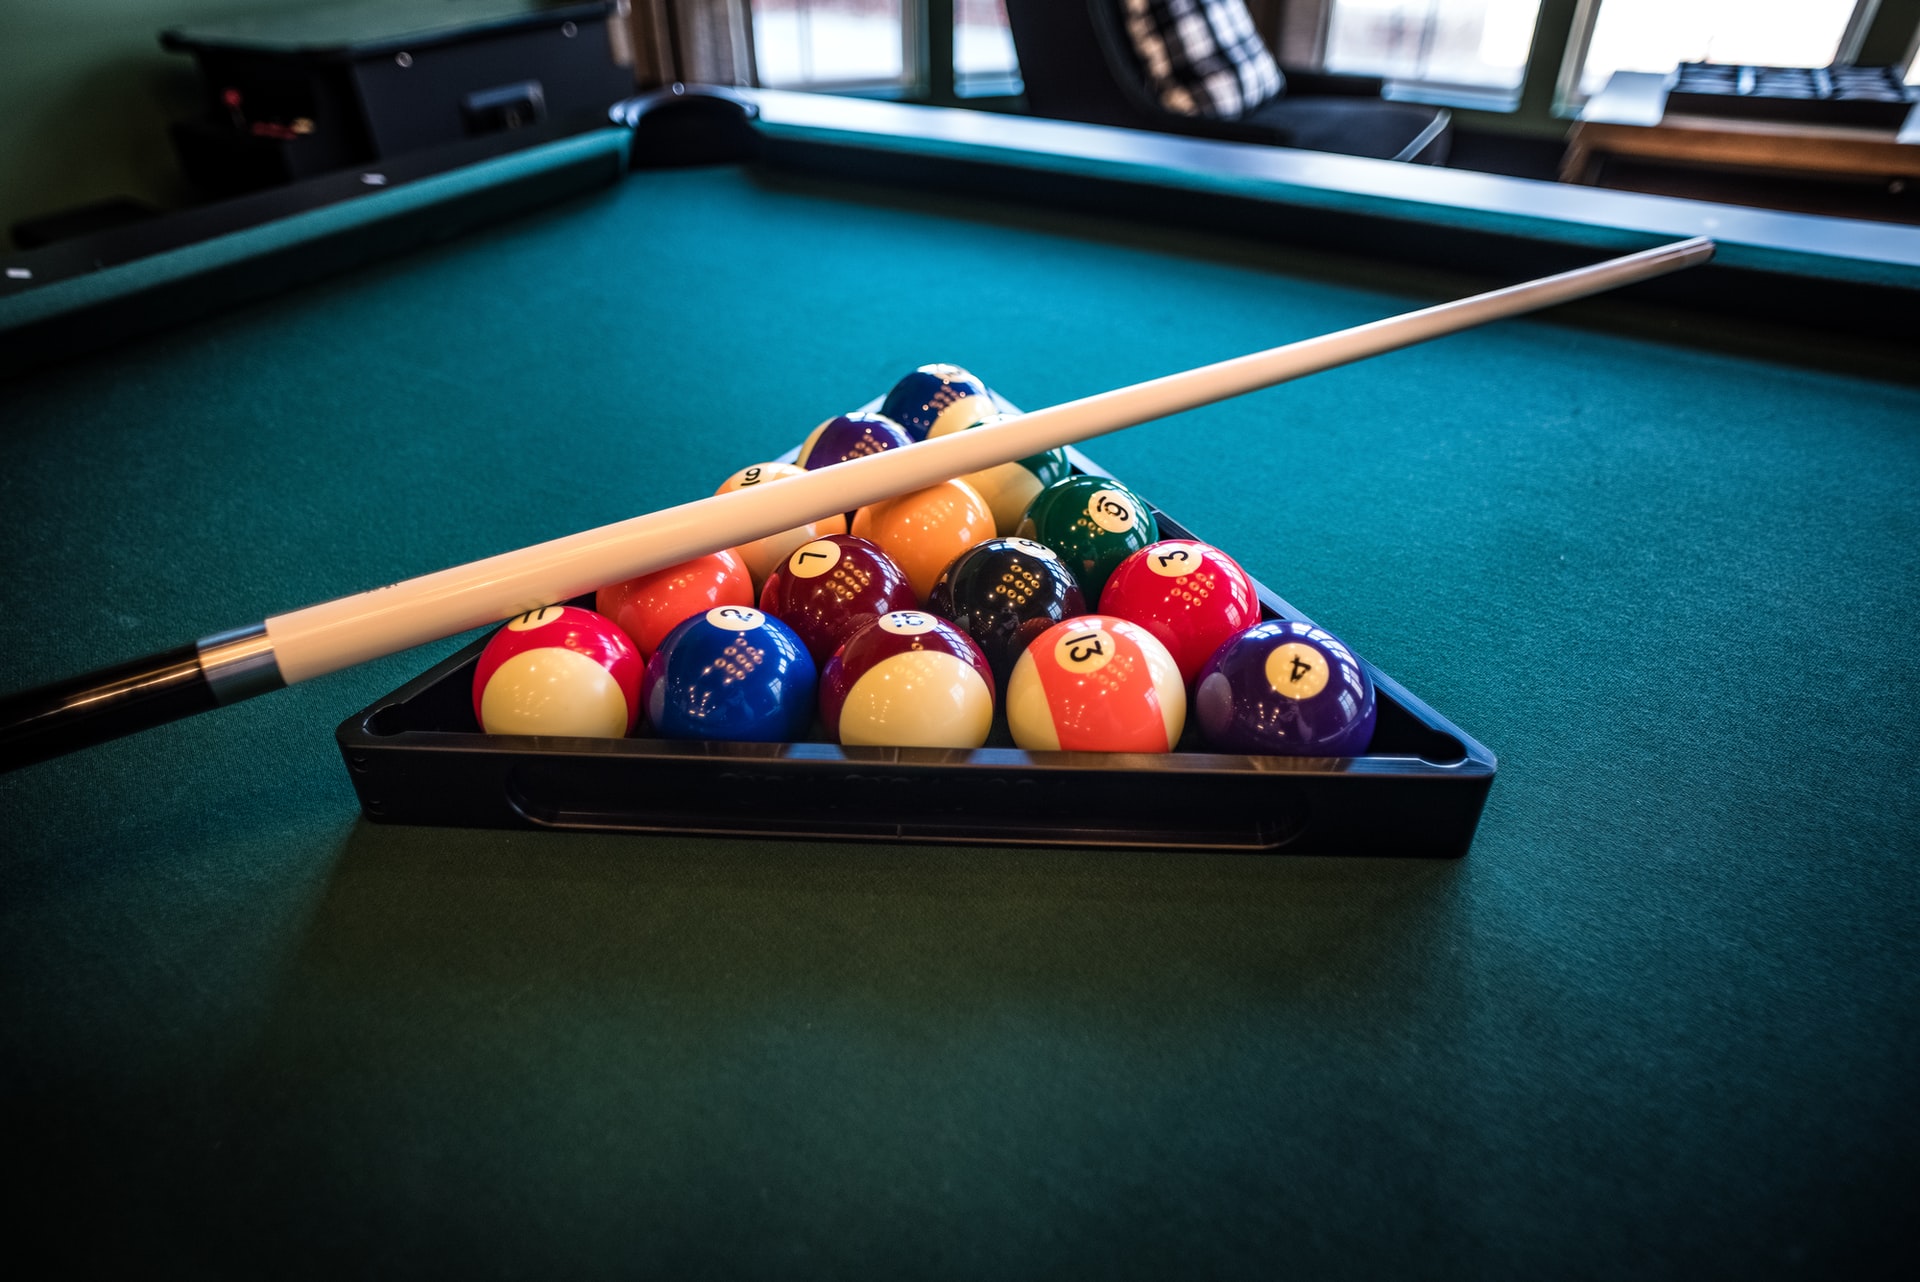 Are expensive pool cues worth the money?